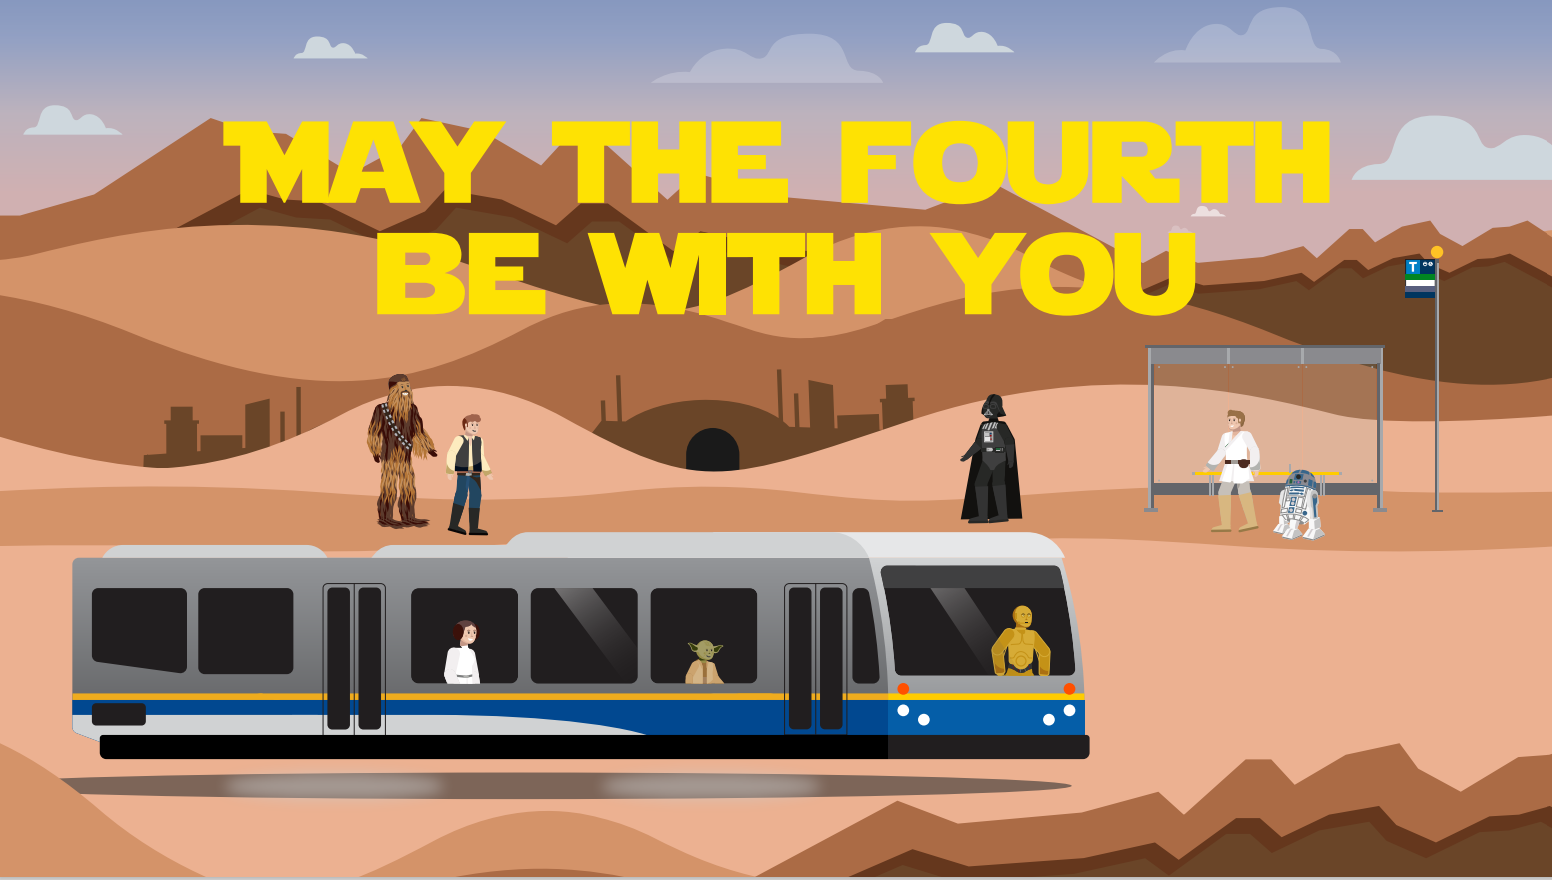 TransLink's "May the Fourth Be With You" banner